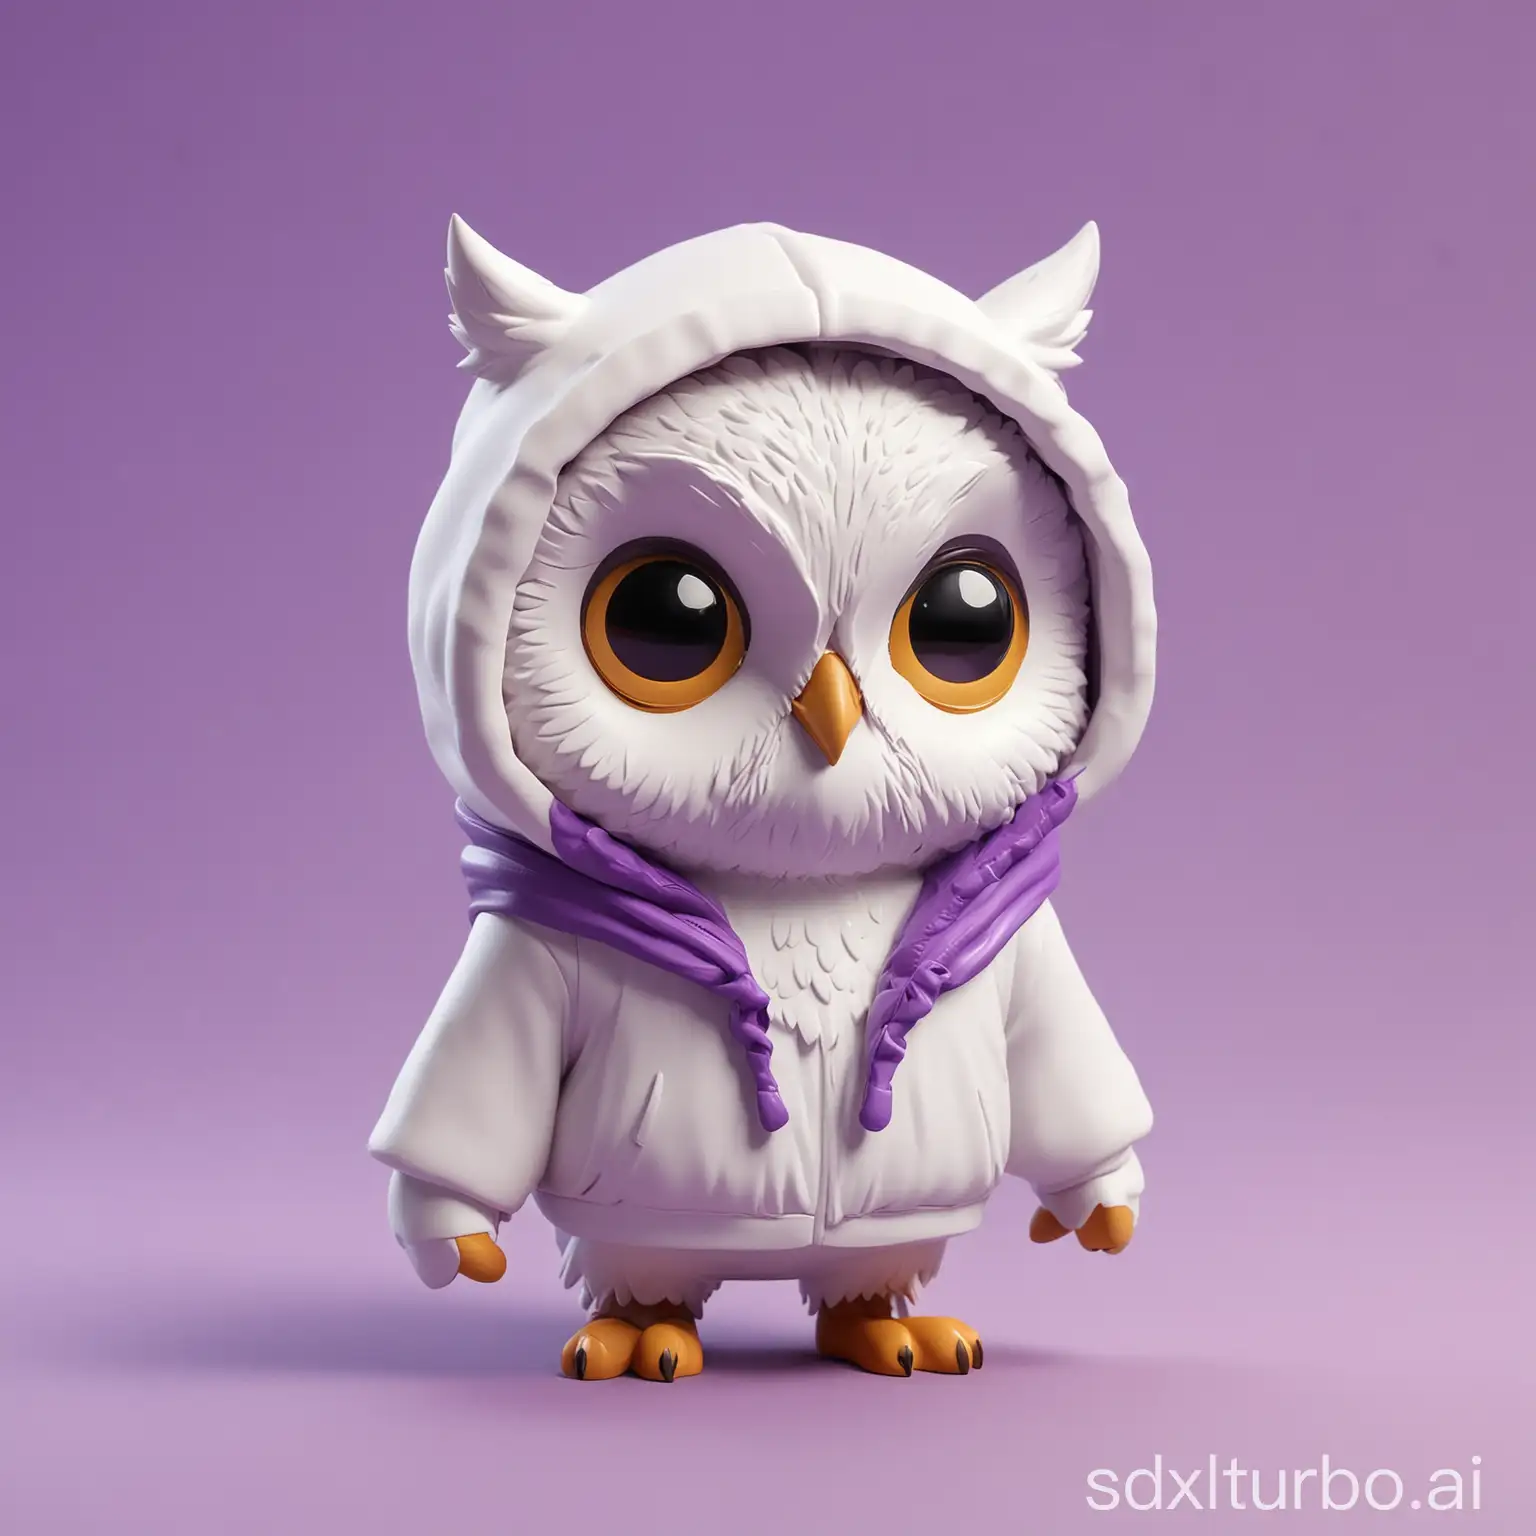 Chibi Vinyl toy 3D character of an owl, isometric render minimalist style, wearing a white hoodie with purple background